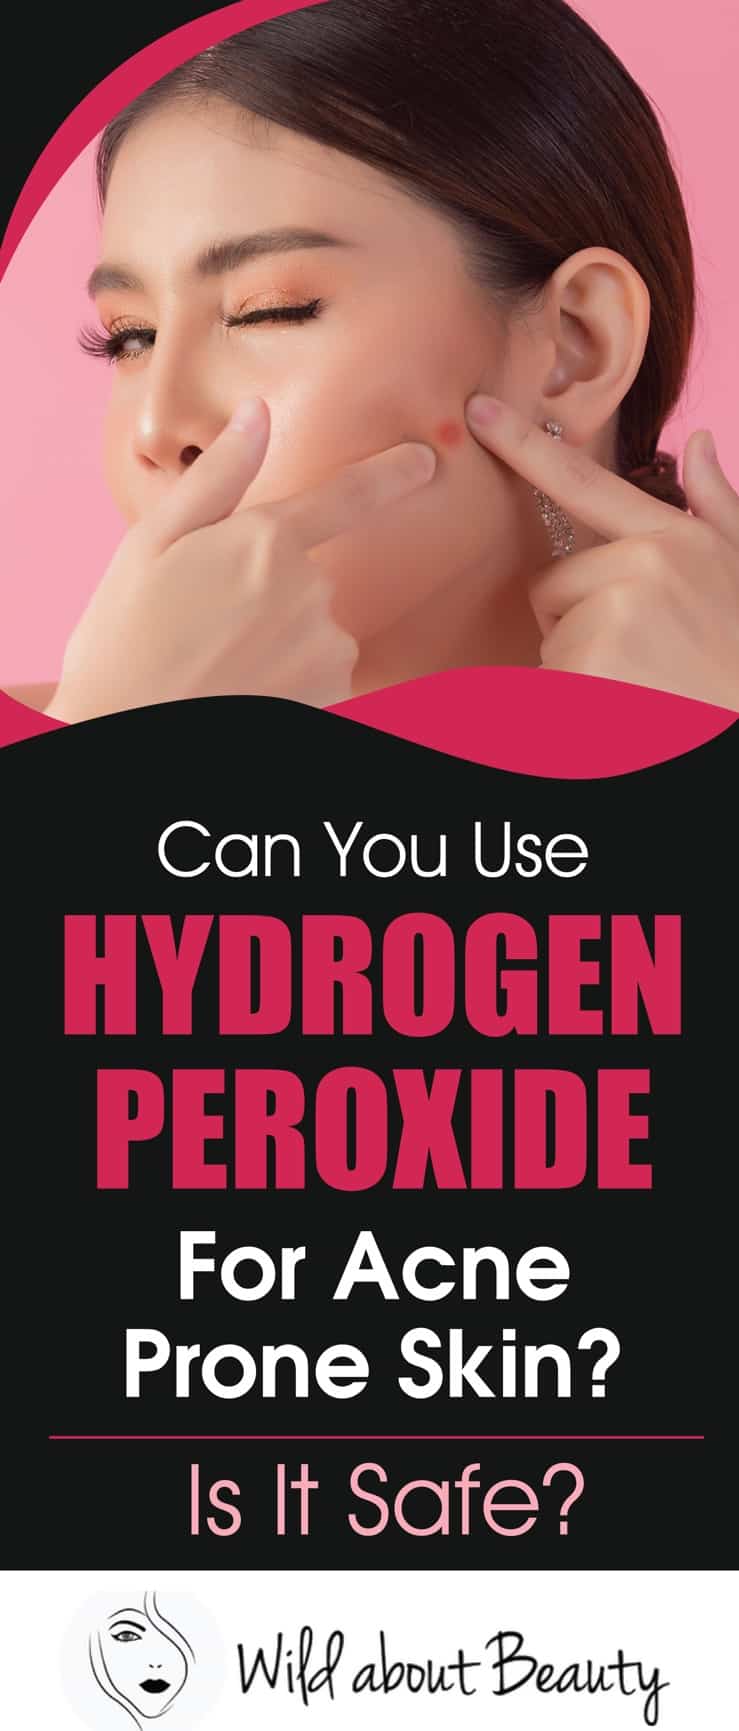 Can You Use Hydrogen Peroxide For Acne Prone Skin? Is It Safe?